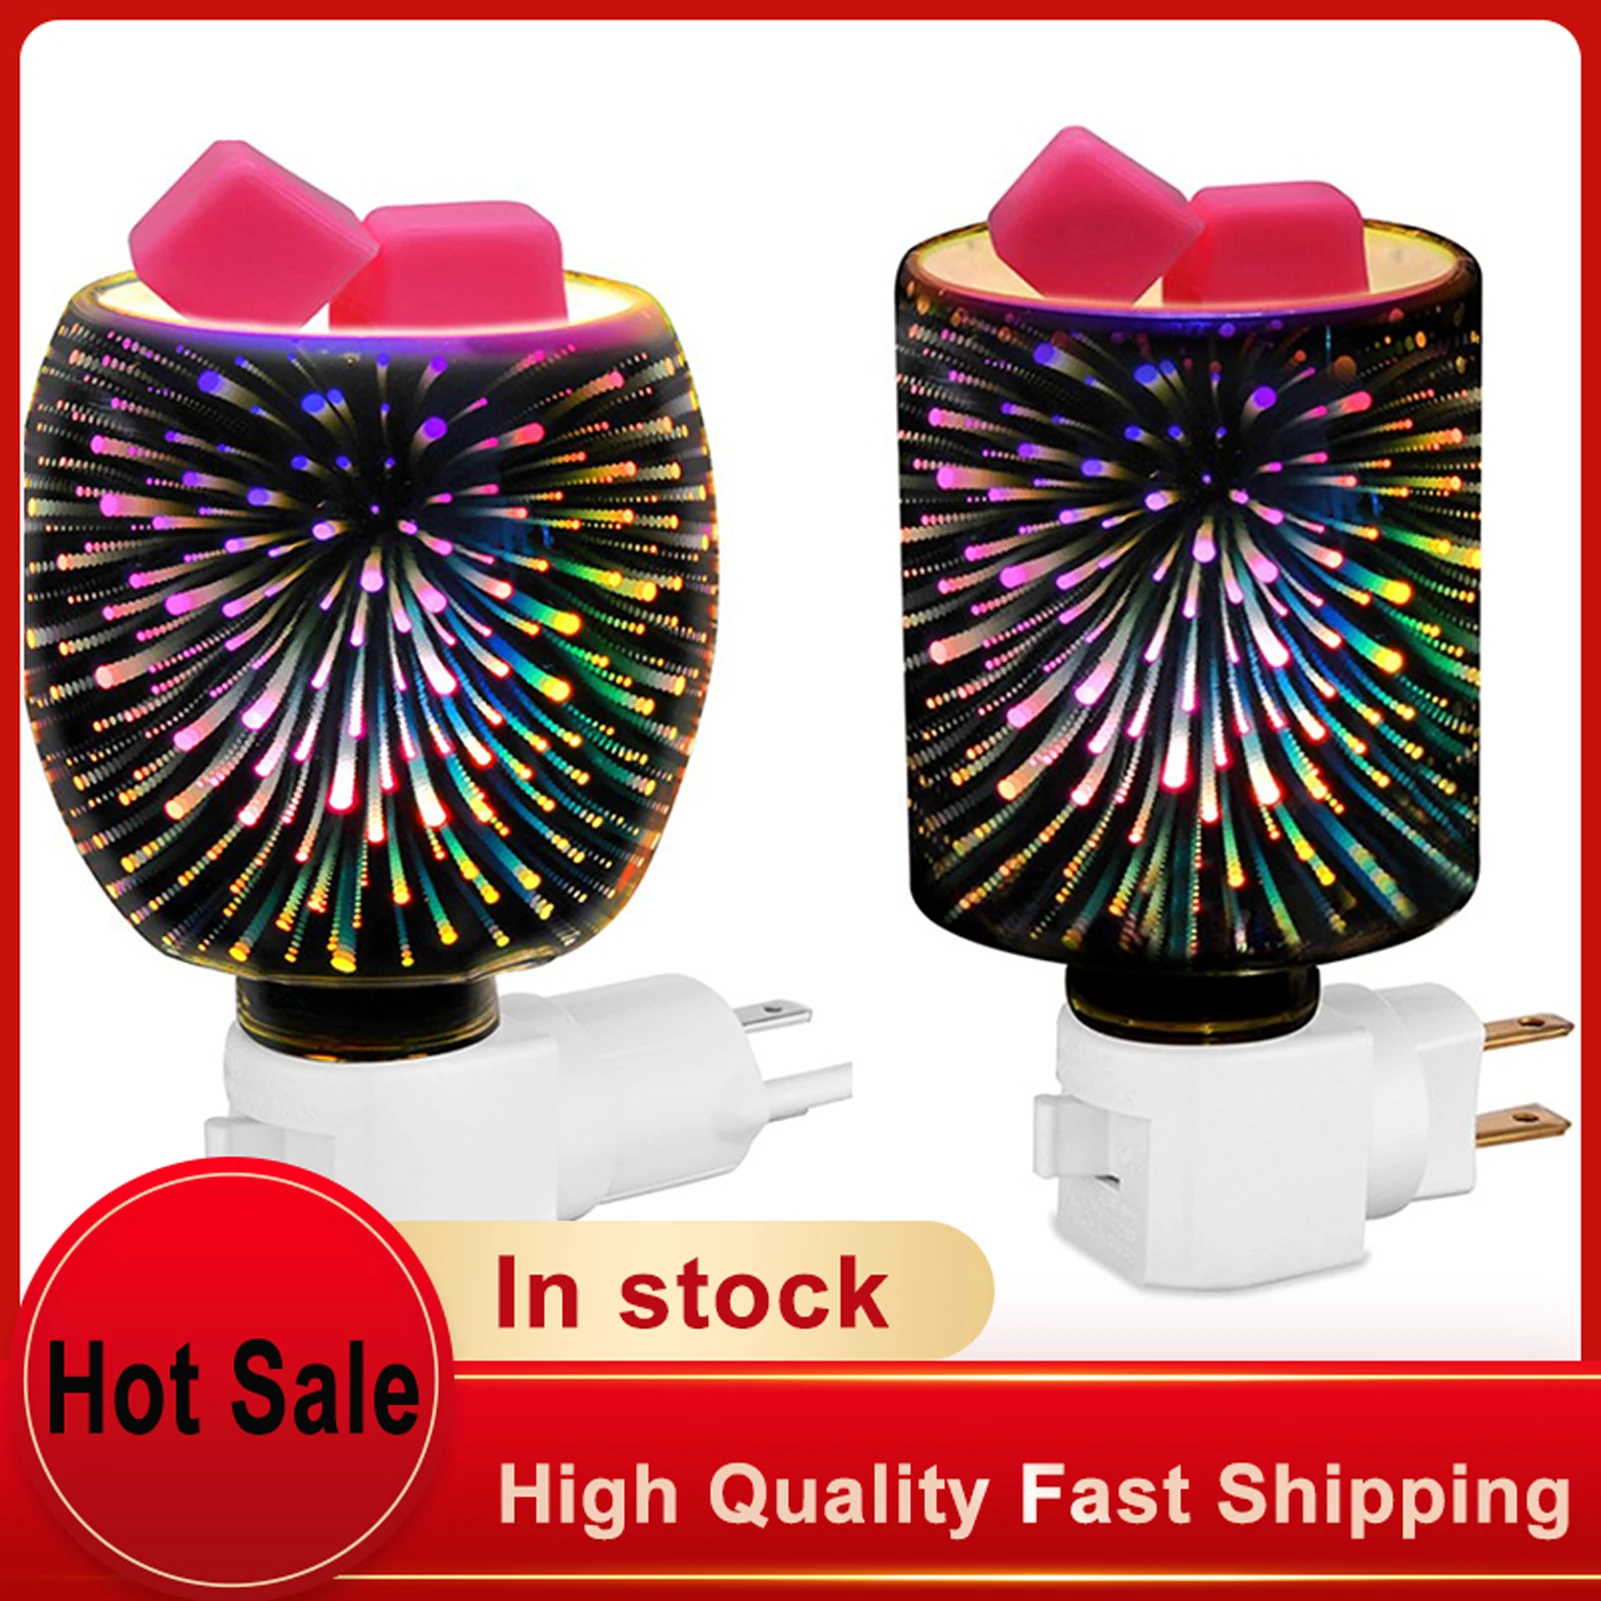 

3D Creative Colorful Aromatherapy Wax Melting Lamp Plug-in Dimming Bedroom Incense Stove Table Lamp Night Light DH